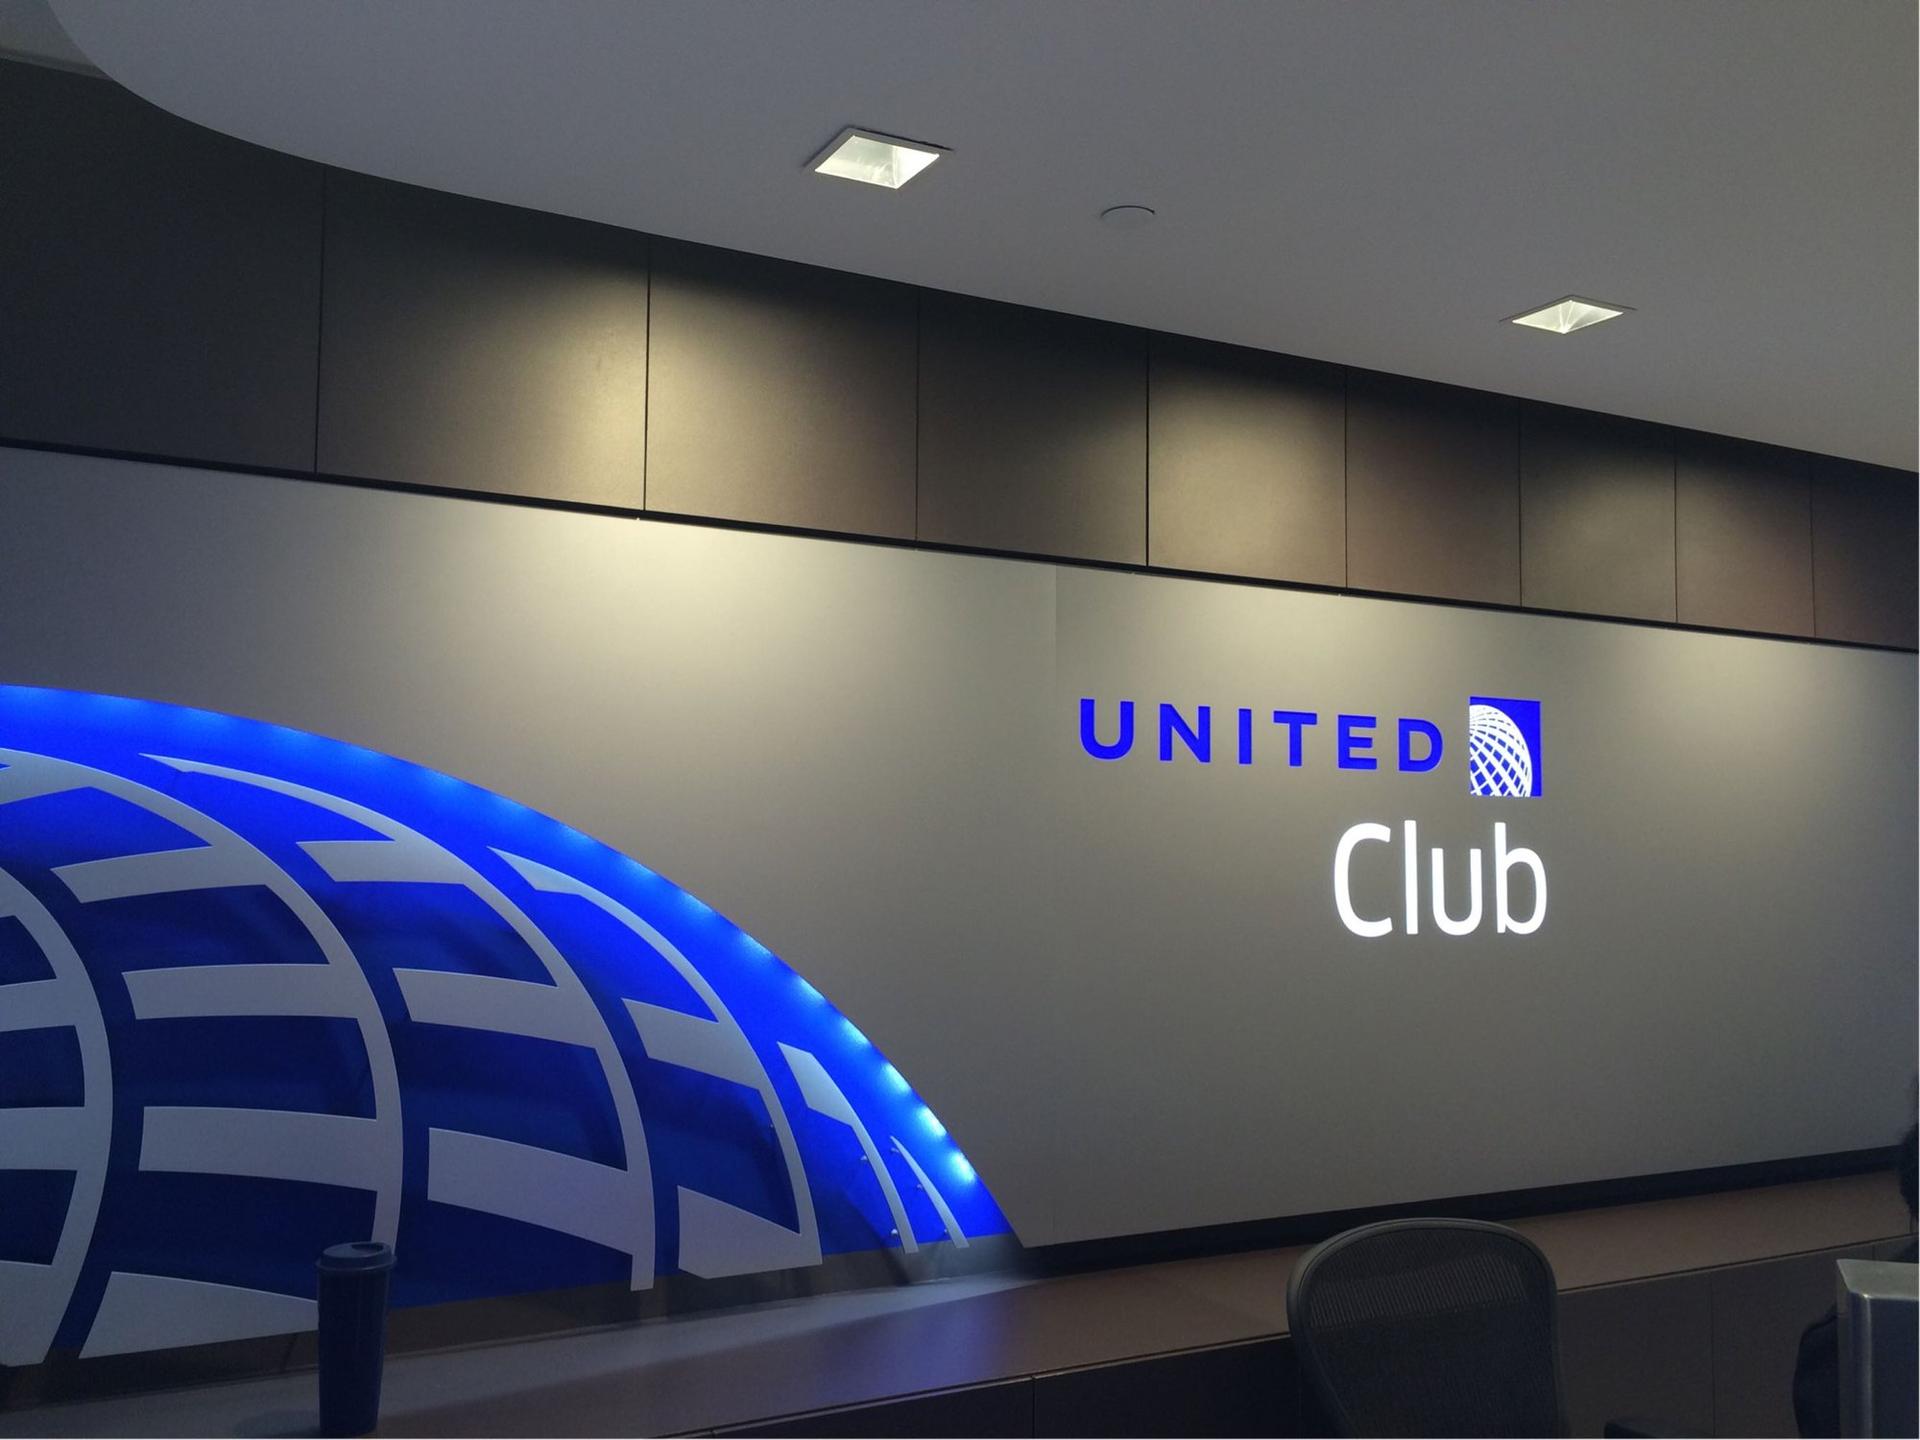 United Airlines United Club image 2 of 43